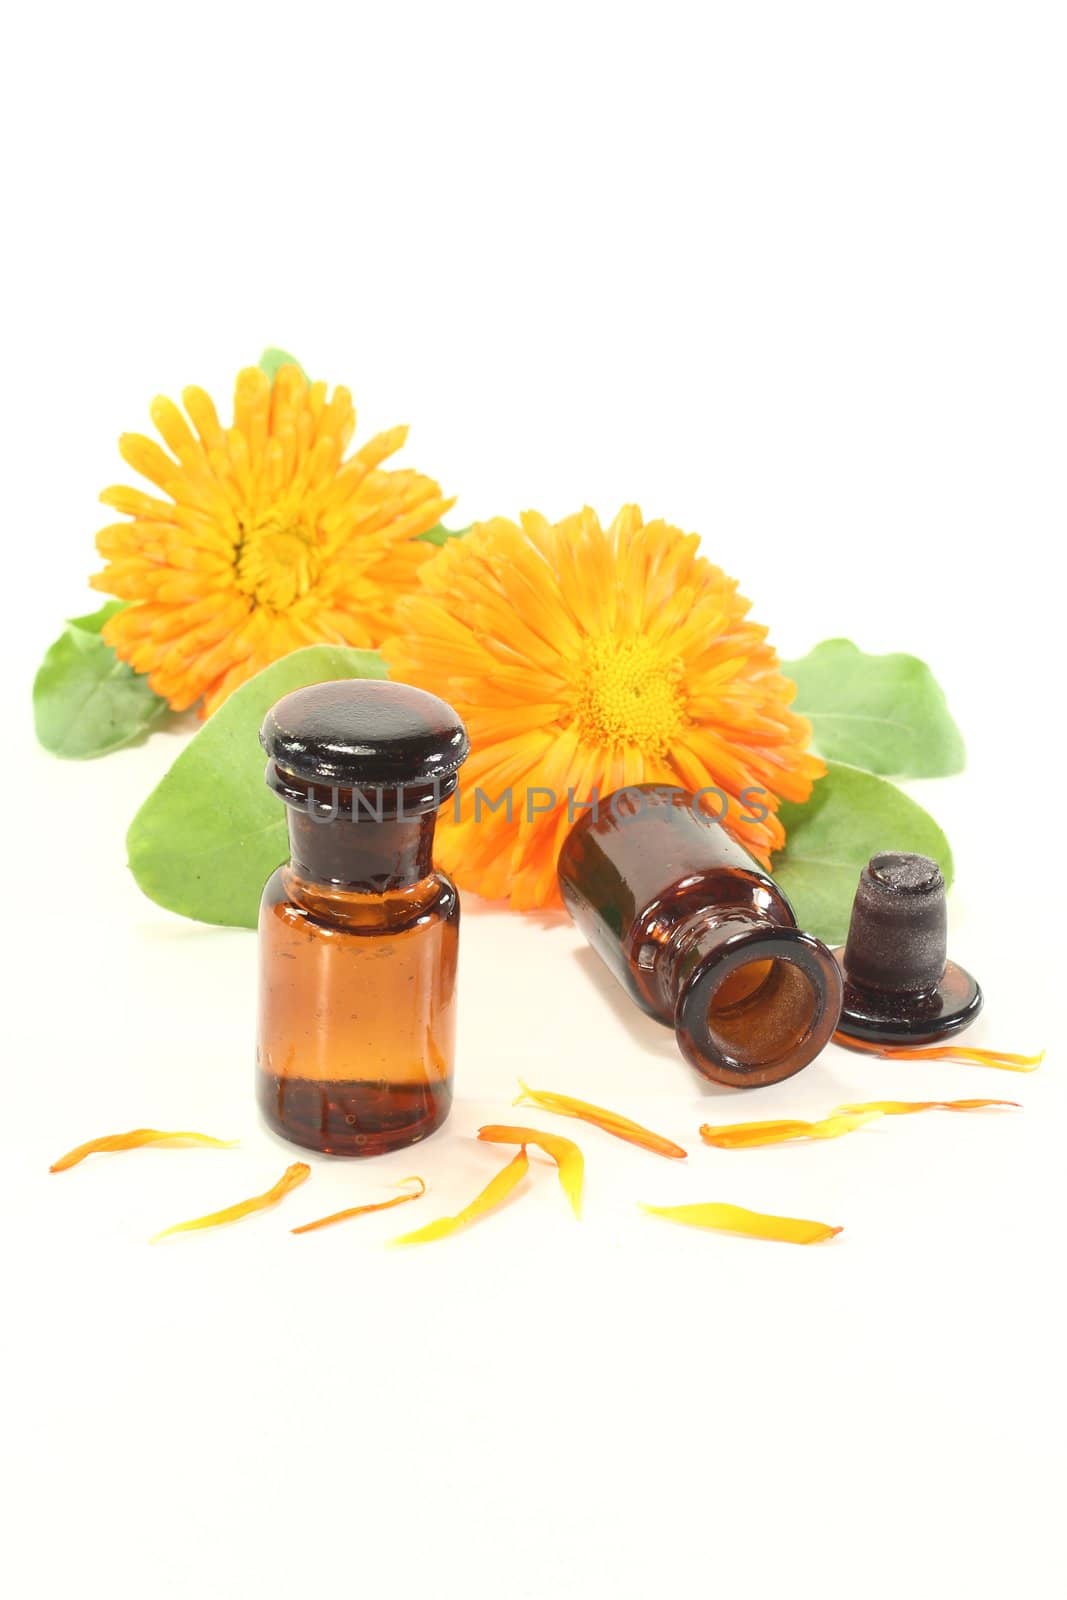 Marigold tincture with fresh calendula flowers and leaves on a light background